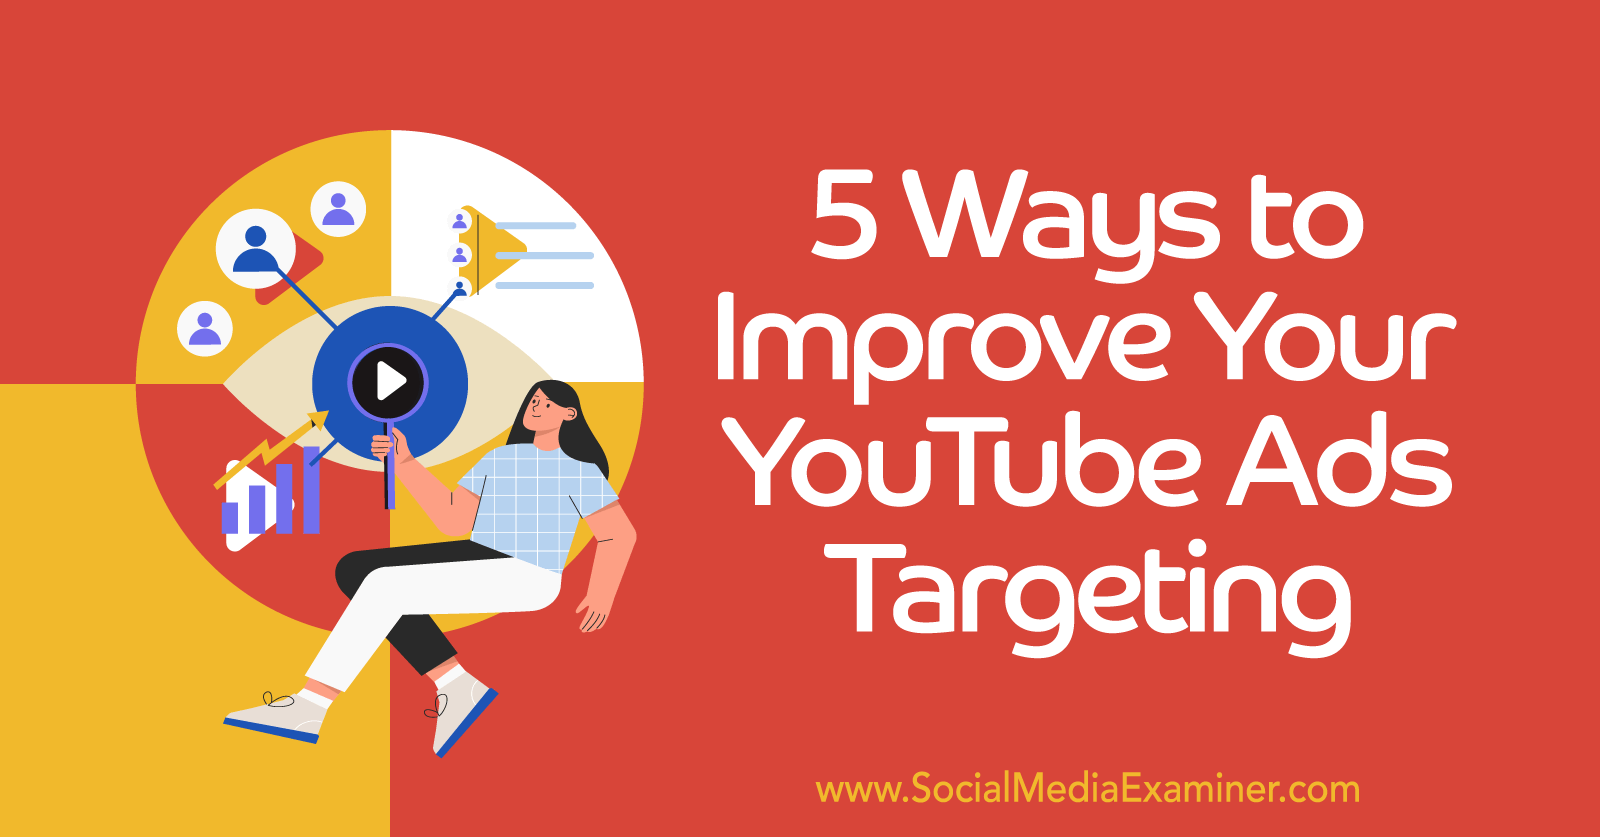 5 Ways to Improve YouTube Ads Audience Targeting-Social Media Examiner